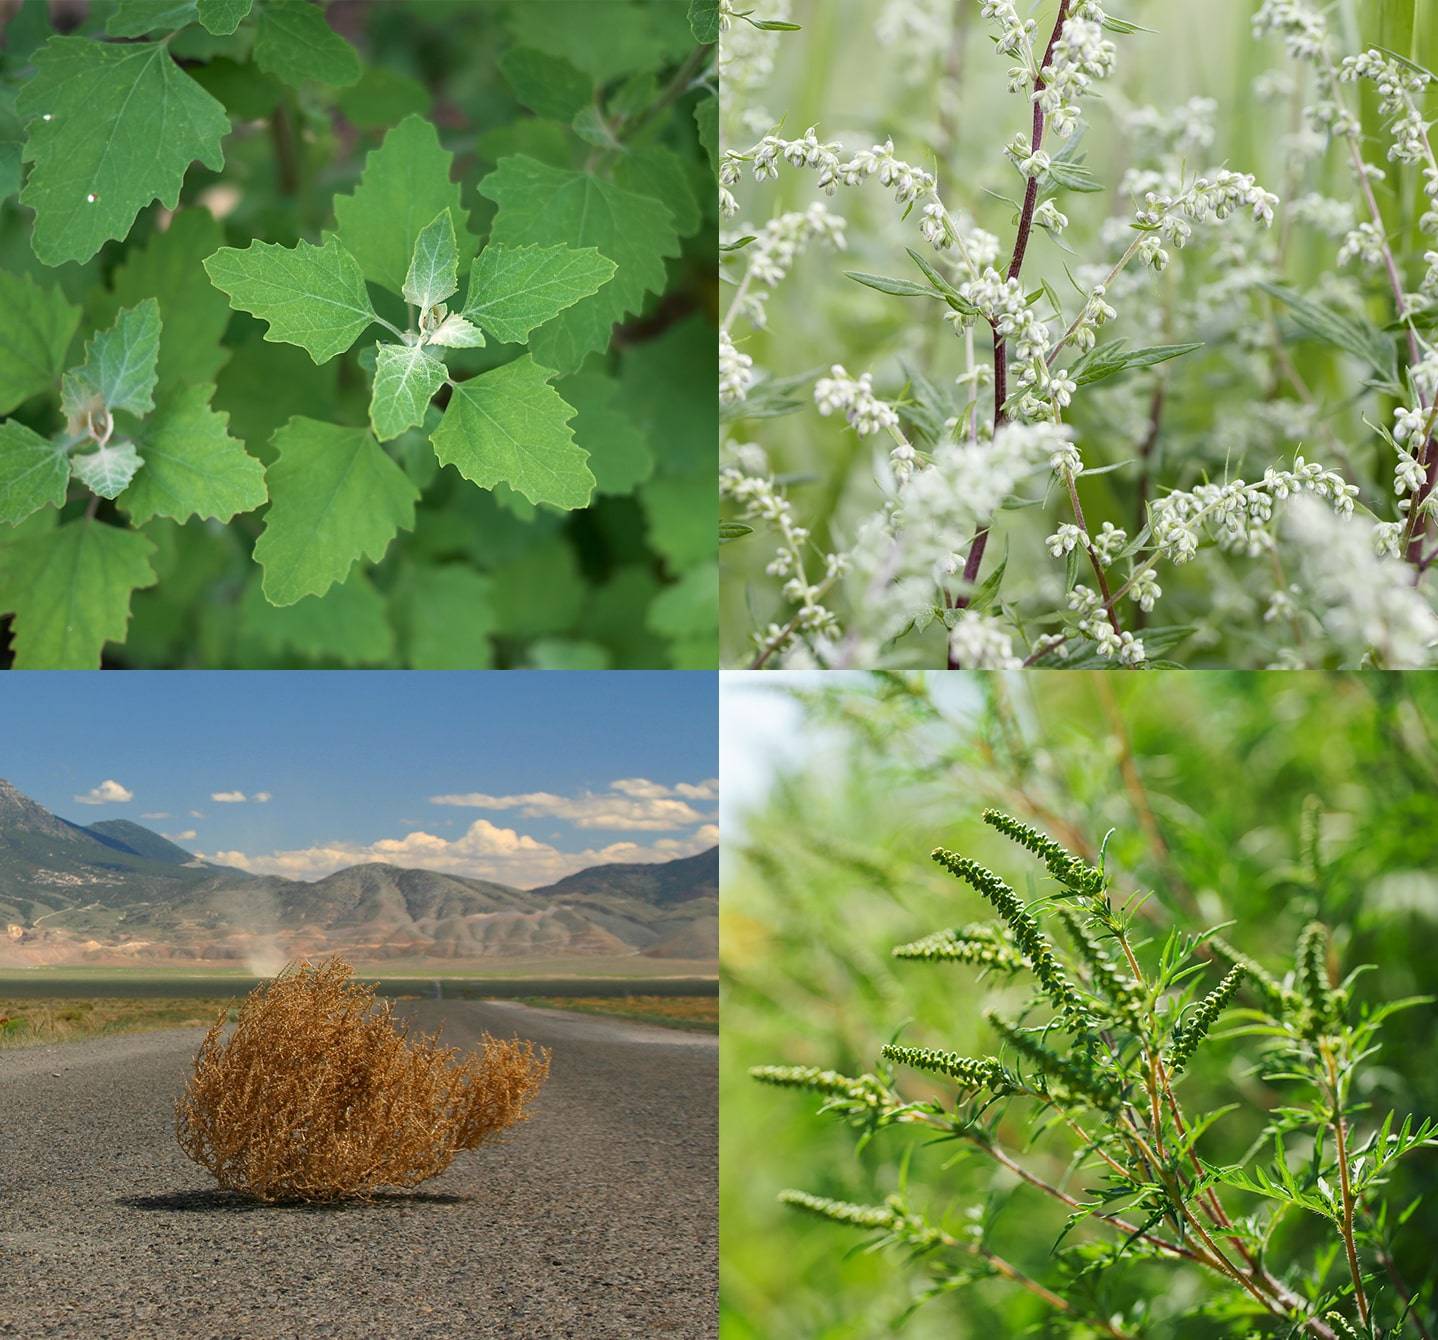 The most common types of weeds that can cause weed pollen allergy include ragweed, tumbleweed, lamb's-quarters and mugwort